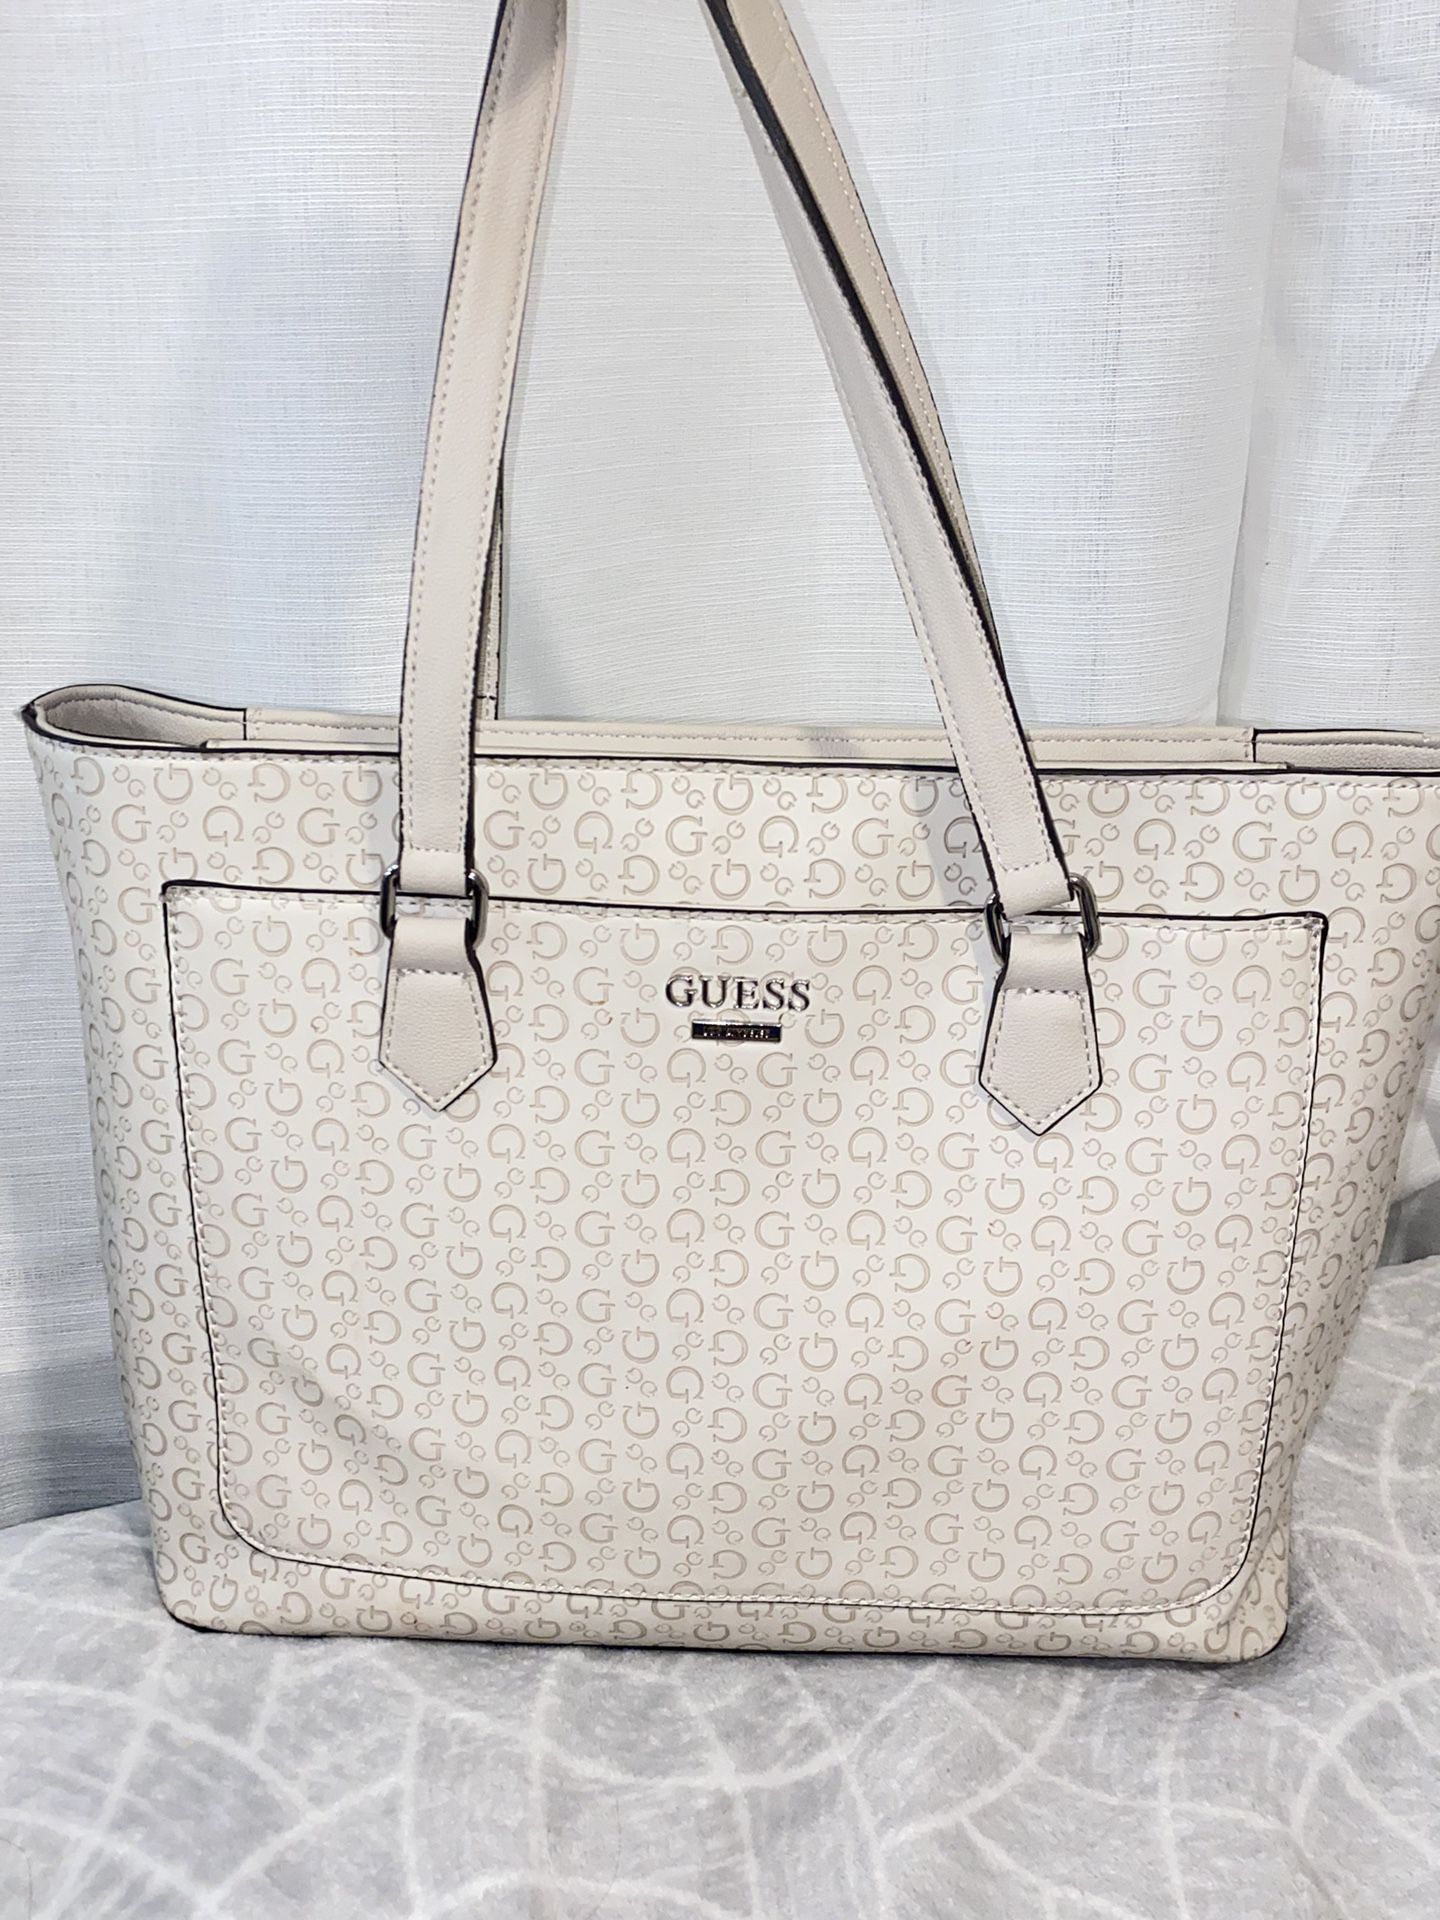 Guess Tote Bag for Sale in Clovis, CA - OfferUp